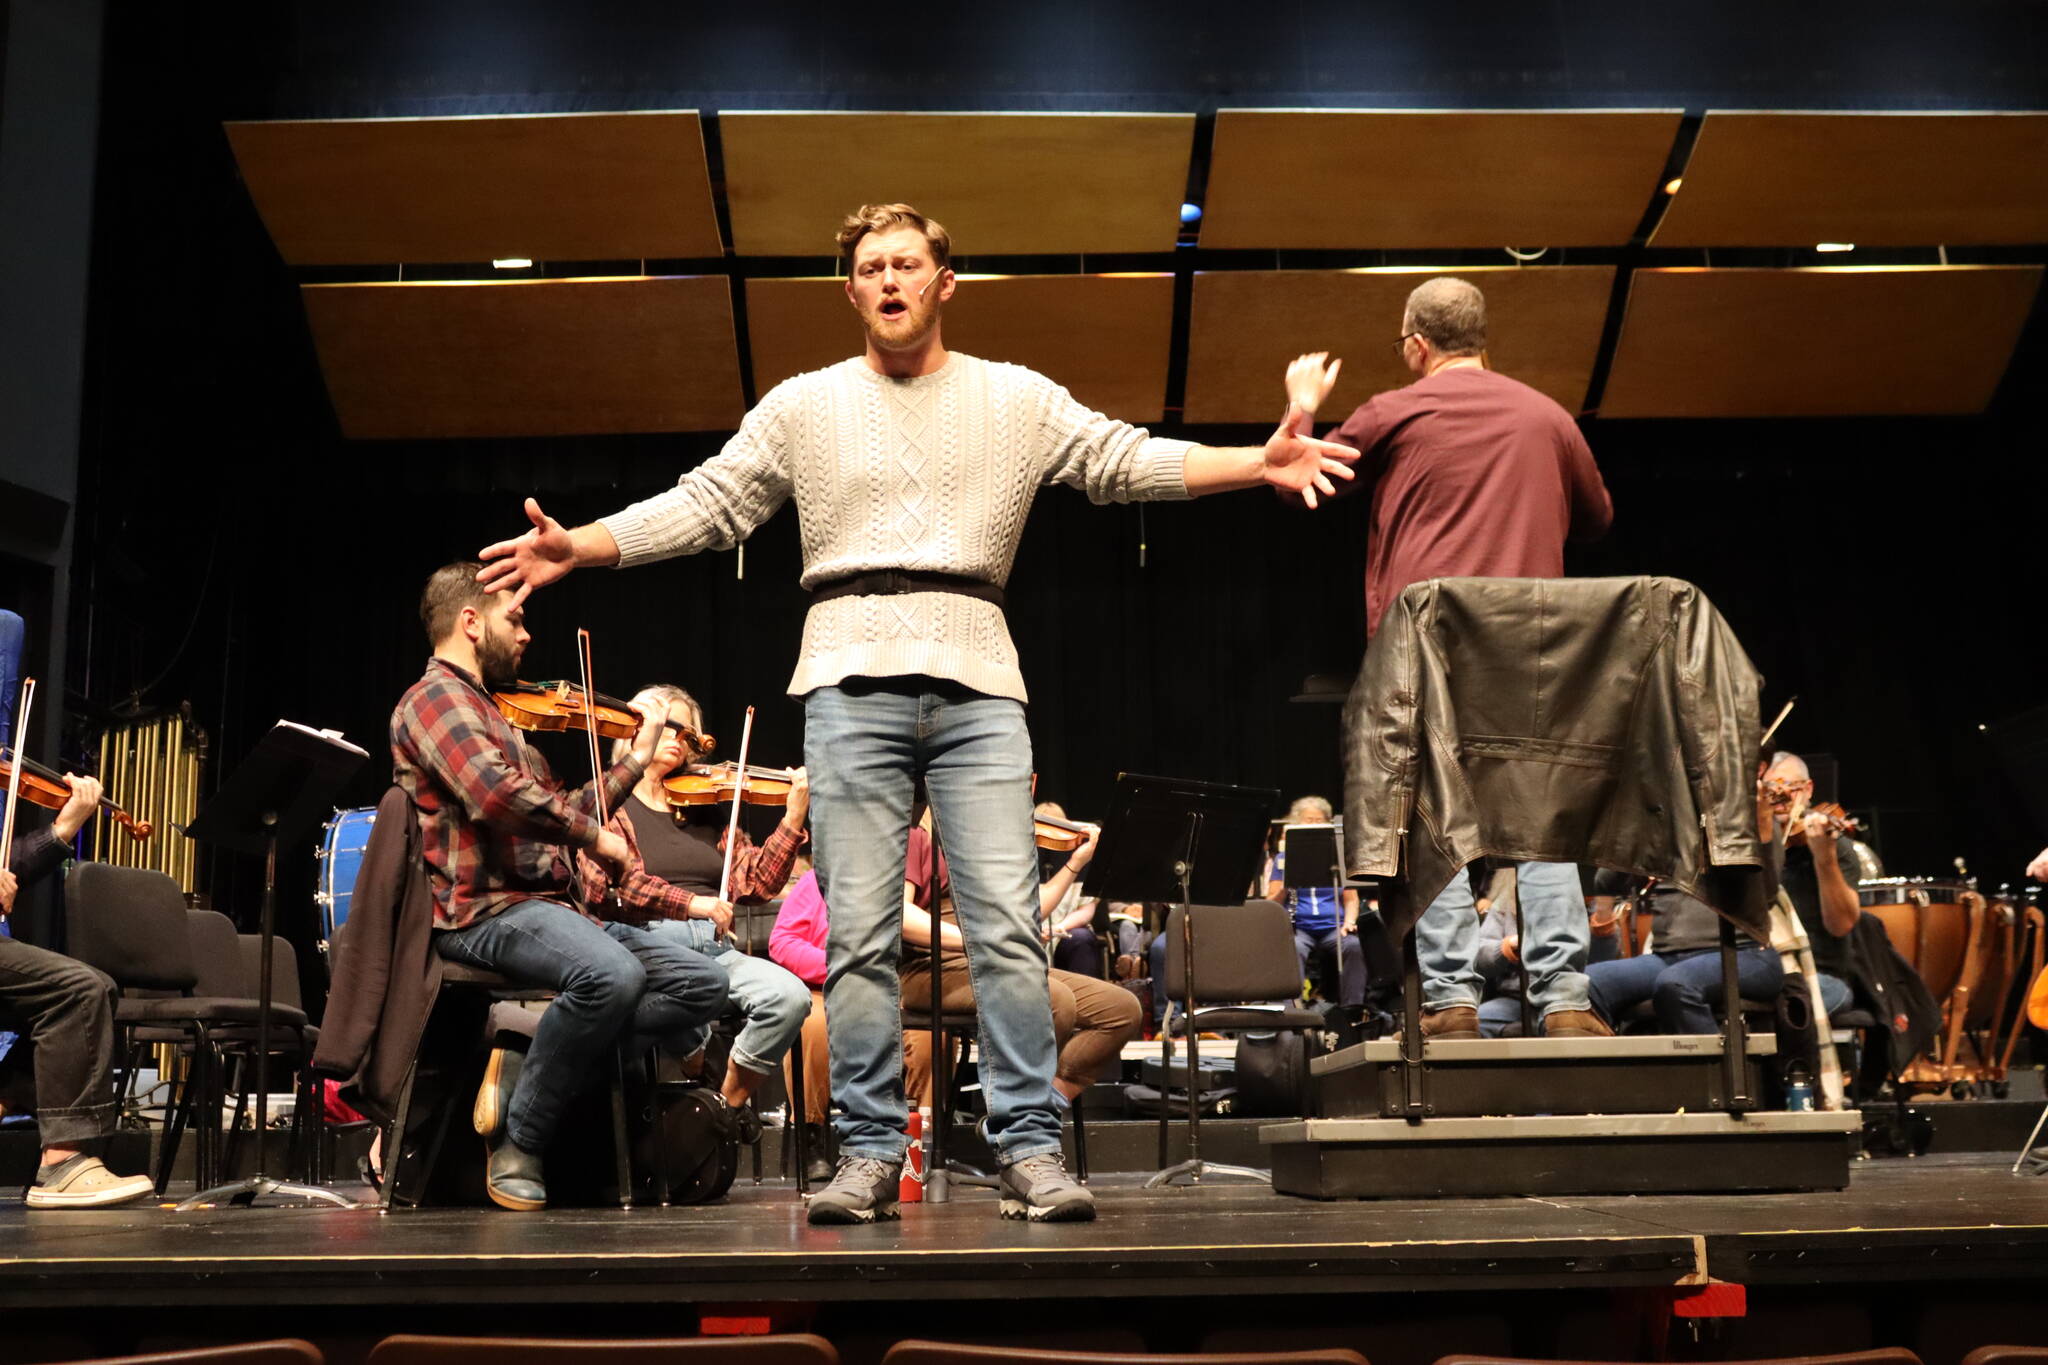 Tanner Johnson, playing the role of Candide, rehearses Tuesday at Juneau-Douglas High School: Yadaa.at Kalé. The operetta “Candide” is based on Stephen Sondheim’s adaptation of the classic novella by Voltaire. (Meredith Jordan/ Juneau Empire)